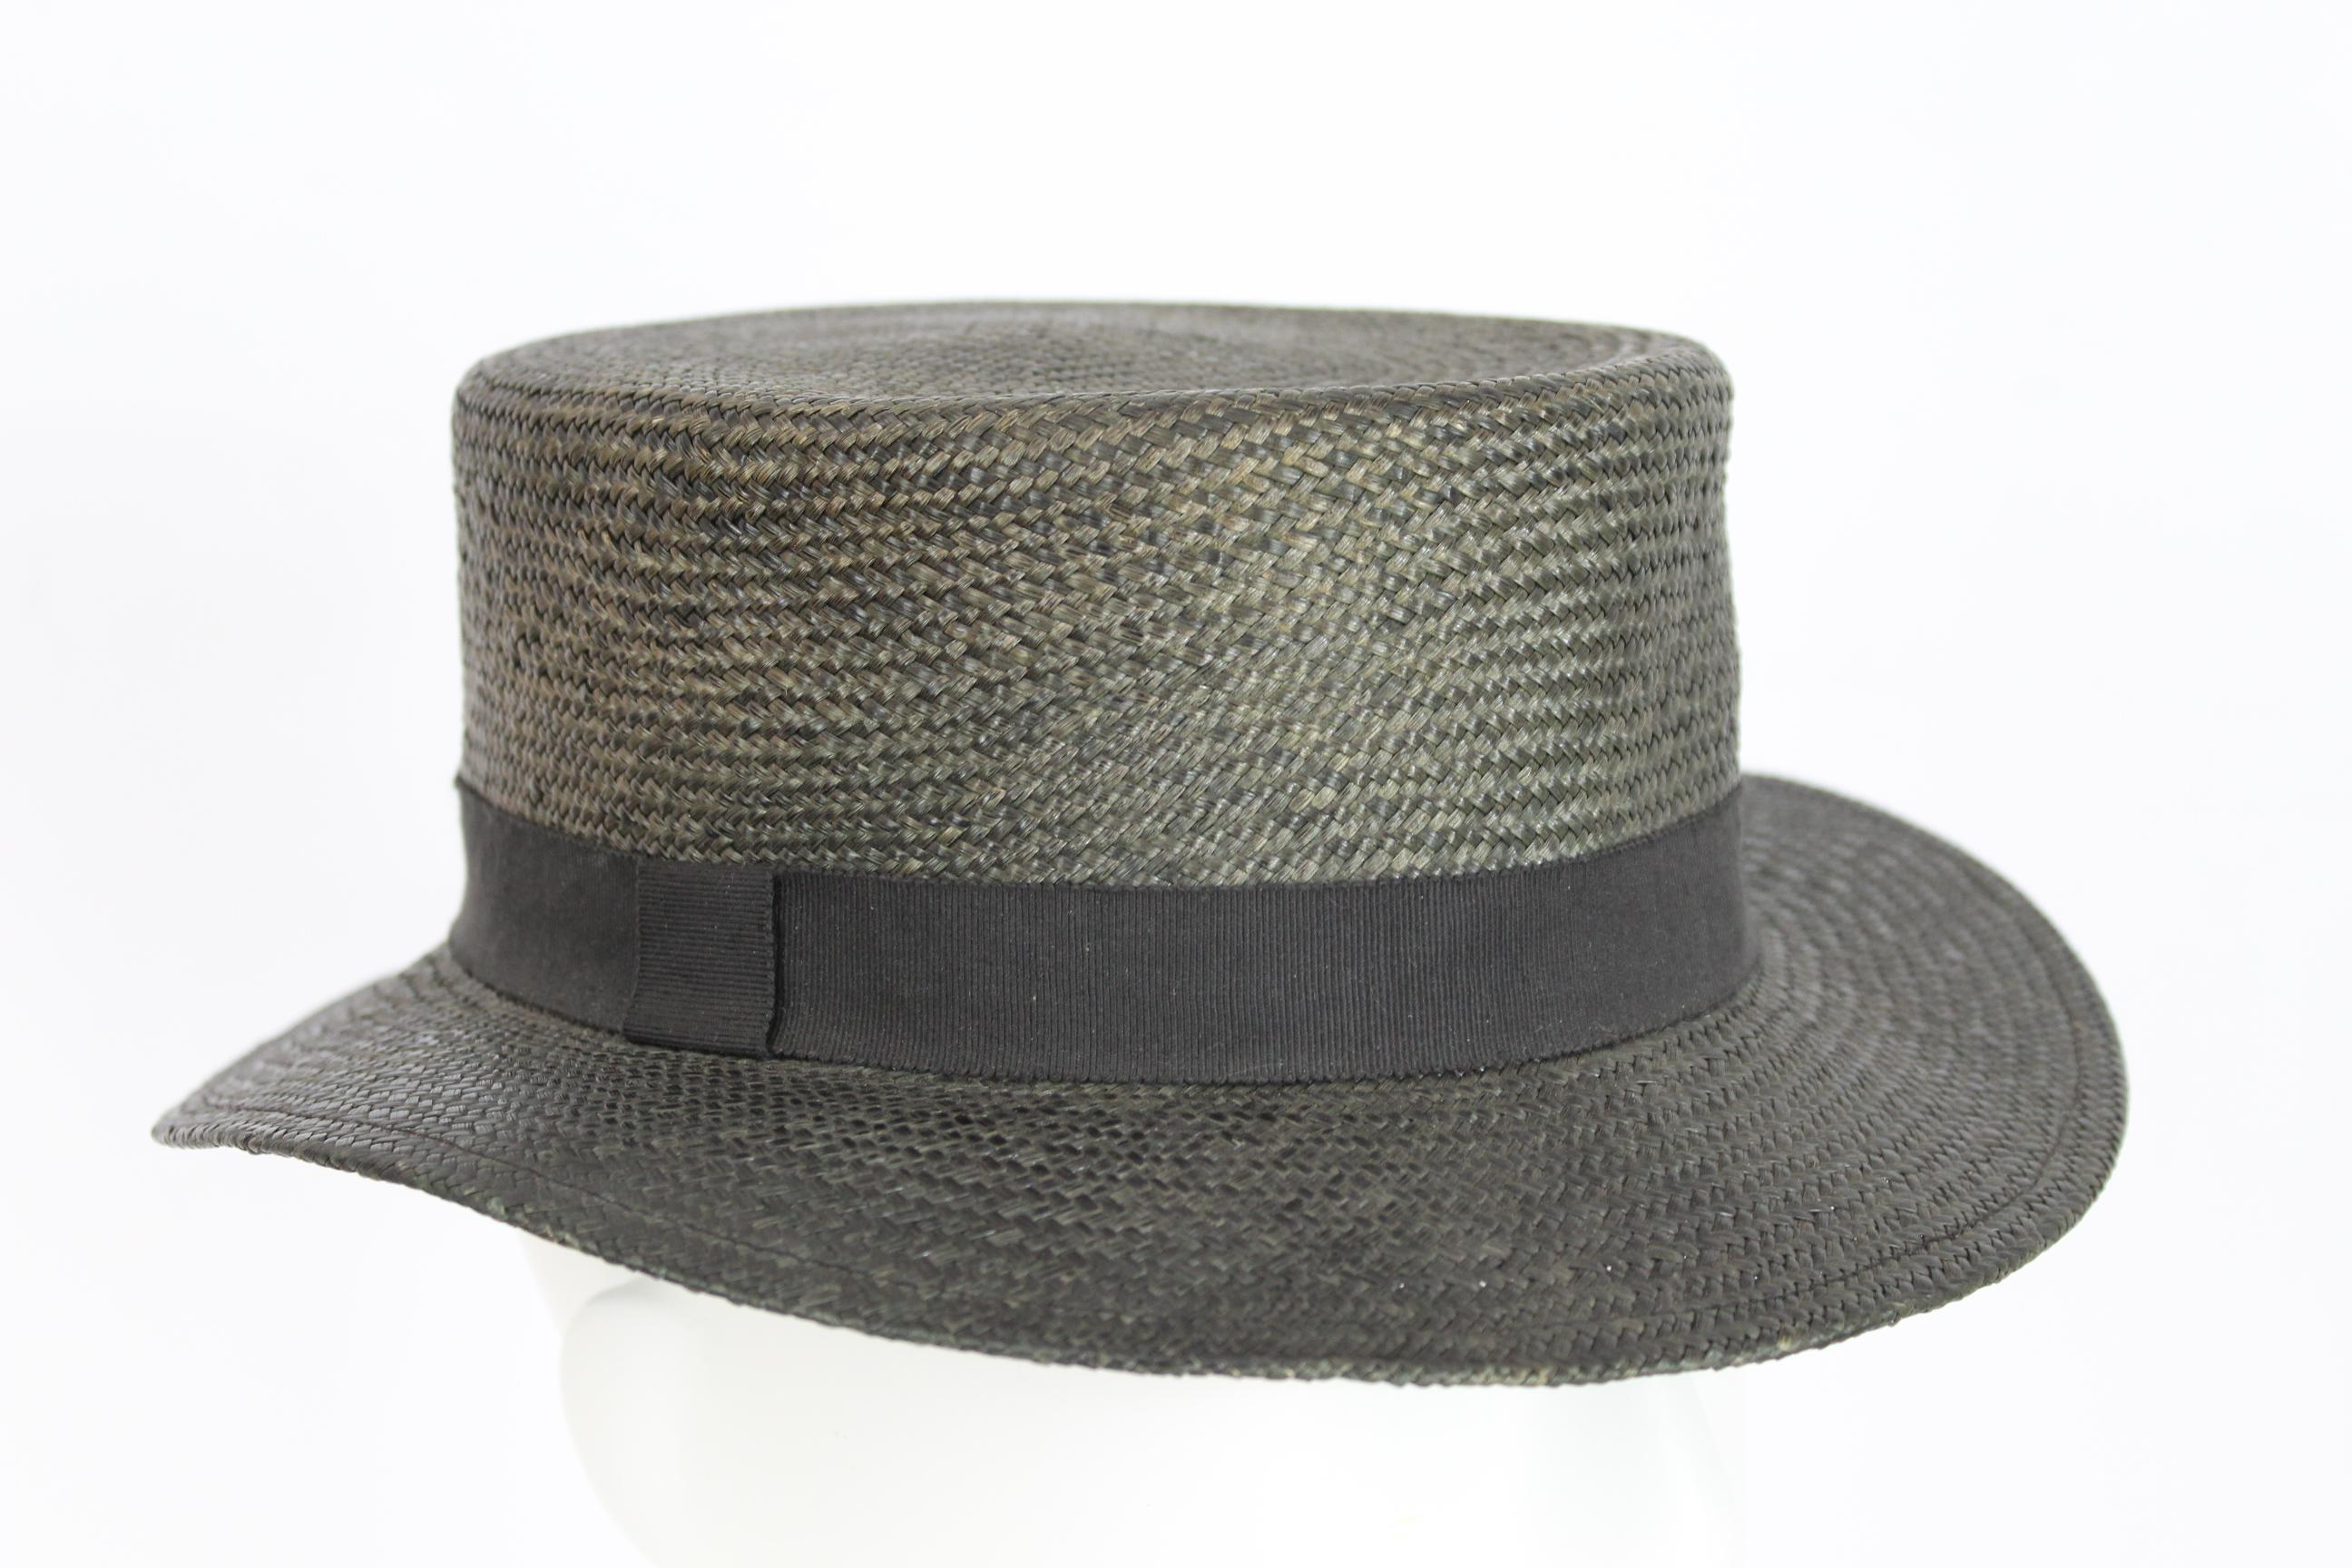 Kenzo vintage women's 90s hat. Fedora model, woven straw type, rigid, dark gray color. Made in Italy. Excellent vintage conditions.

Diameter: 17 cm